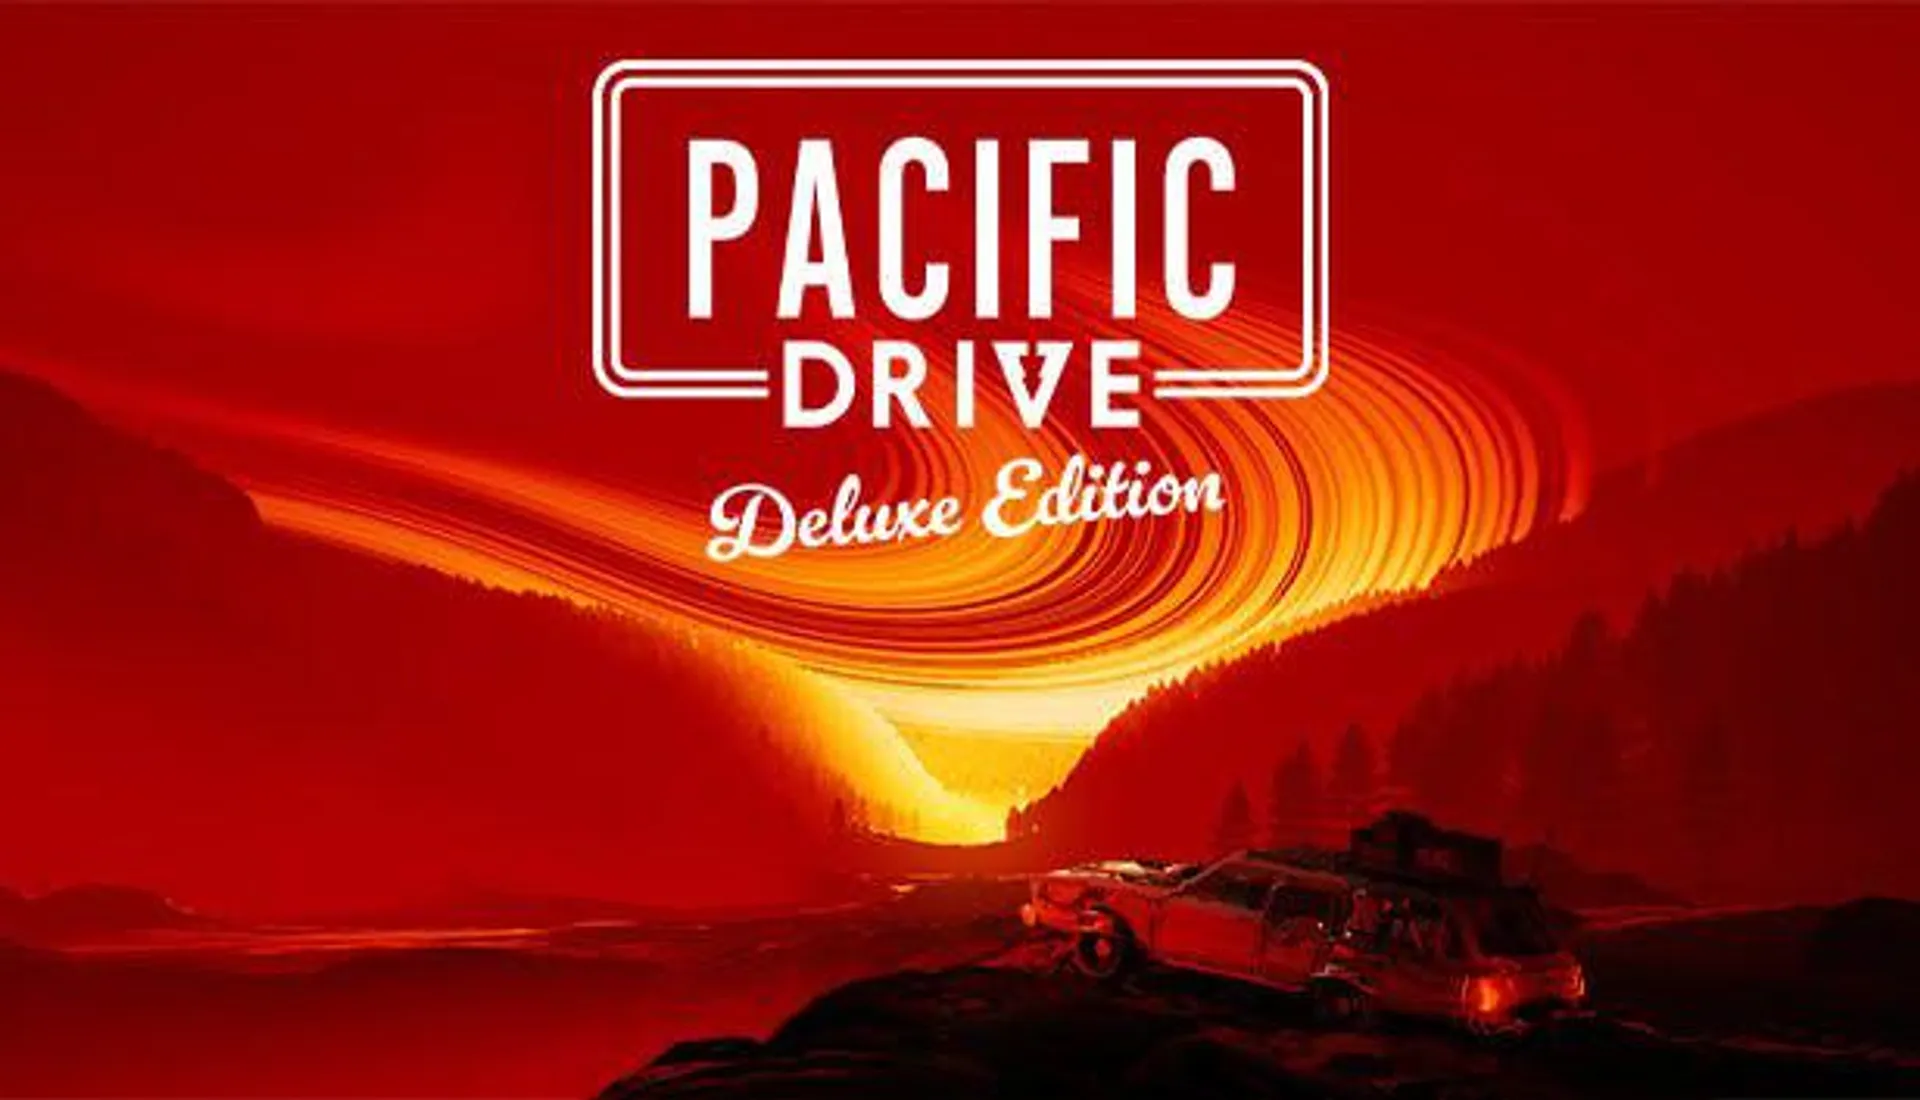 Pacific Drive - Deluxe Edition